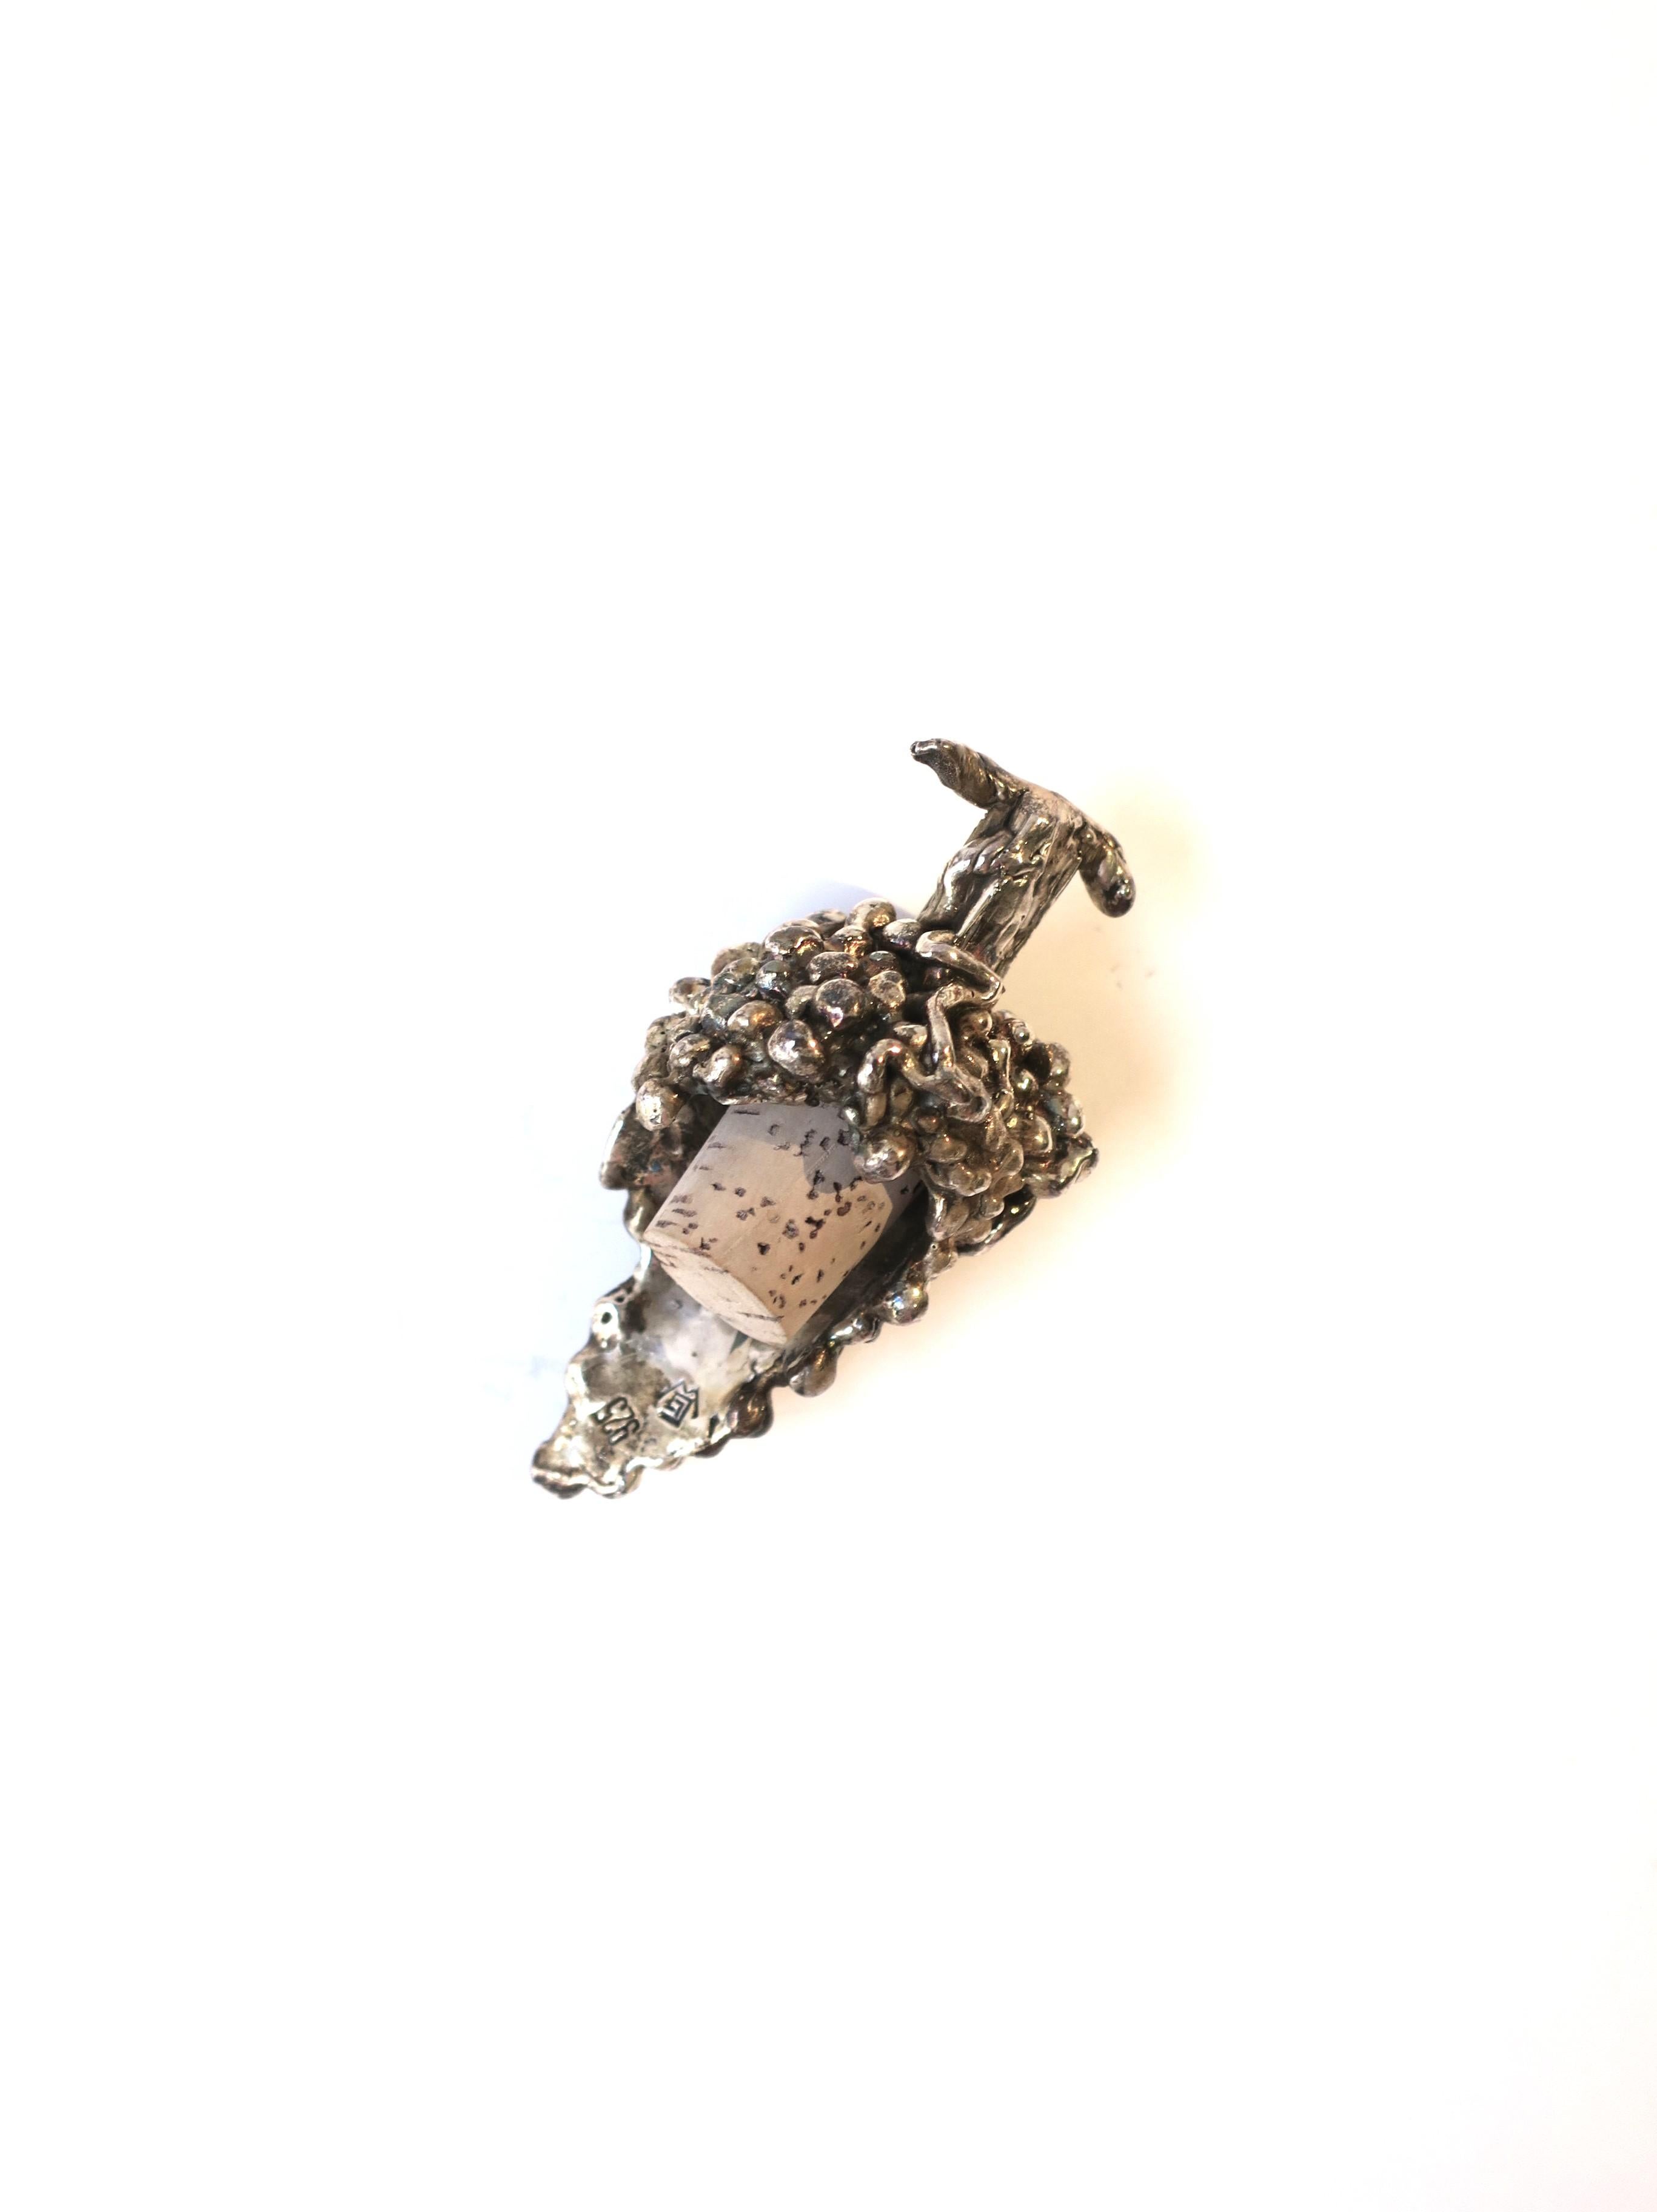 20th Century Sterling Silver Wine Bottle Stopper Grapes  For Sale